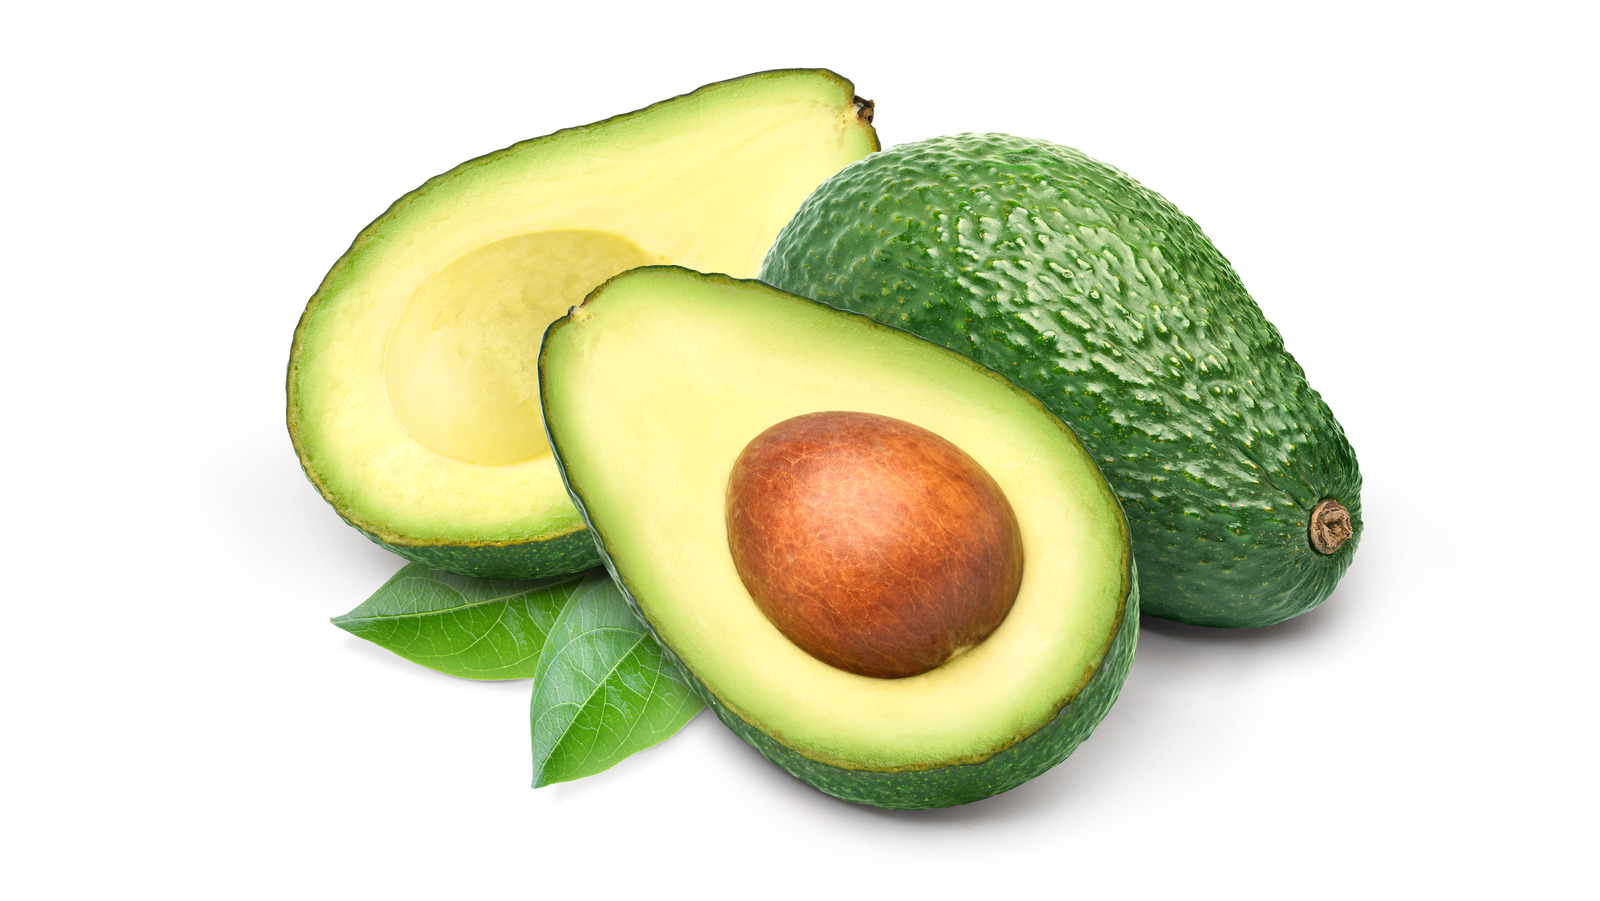 https://www.thedailymeal.com/img/gallery/how-to-ripen-avocados-quickly-with-one-fruity-ingredient/l-intro-1678301262.jpg